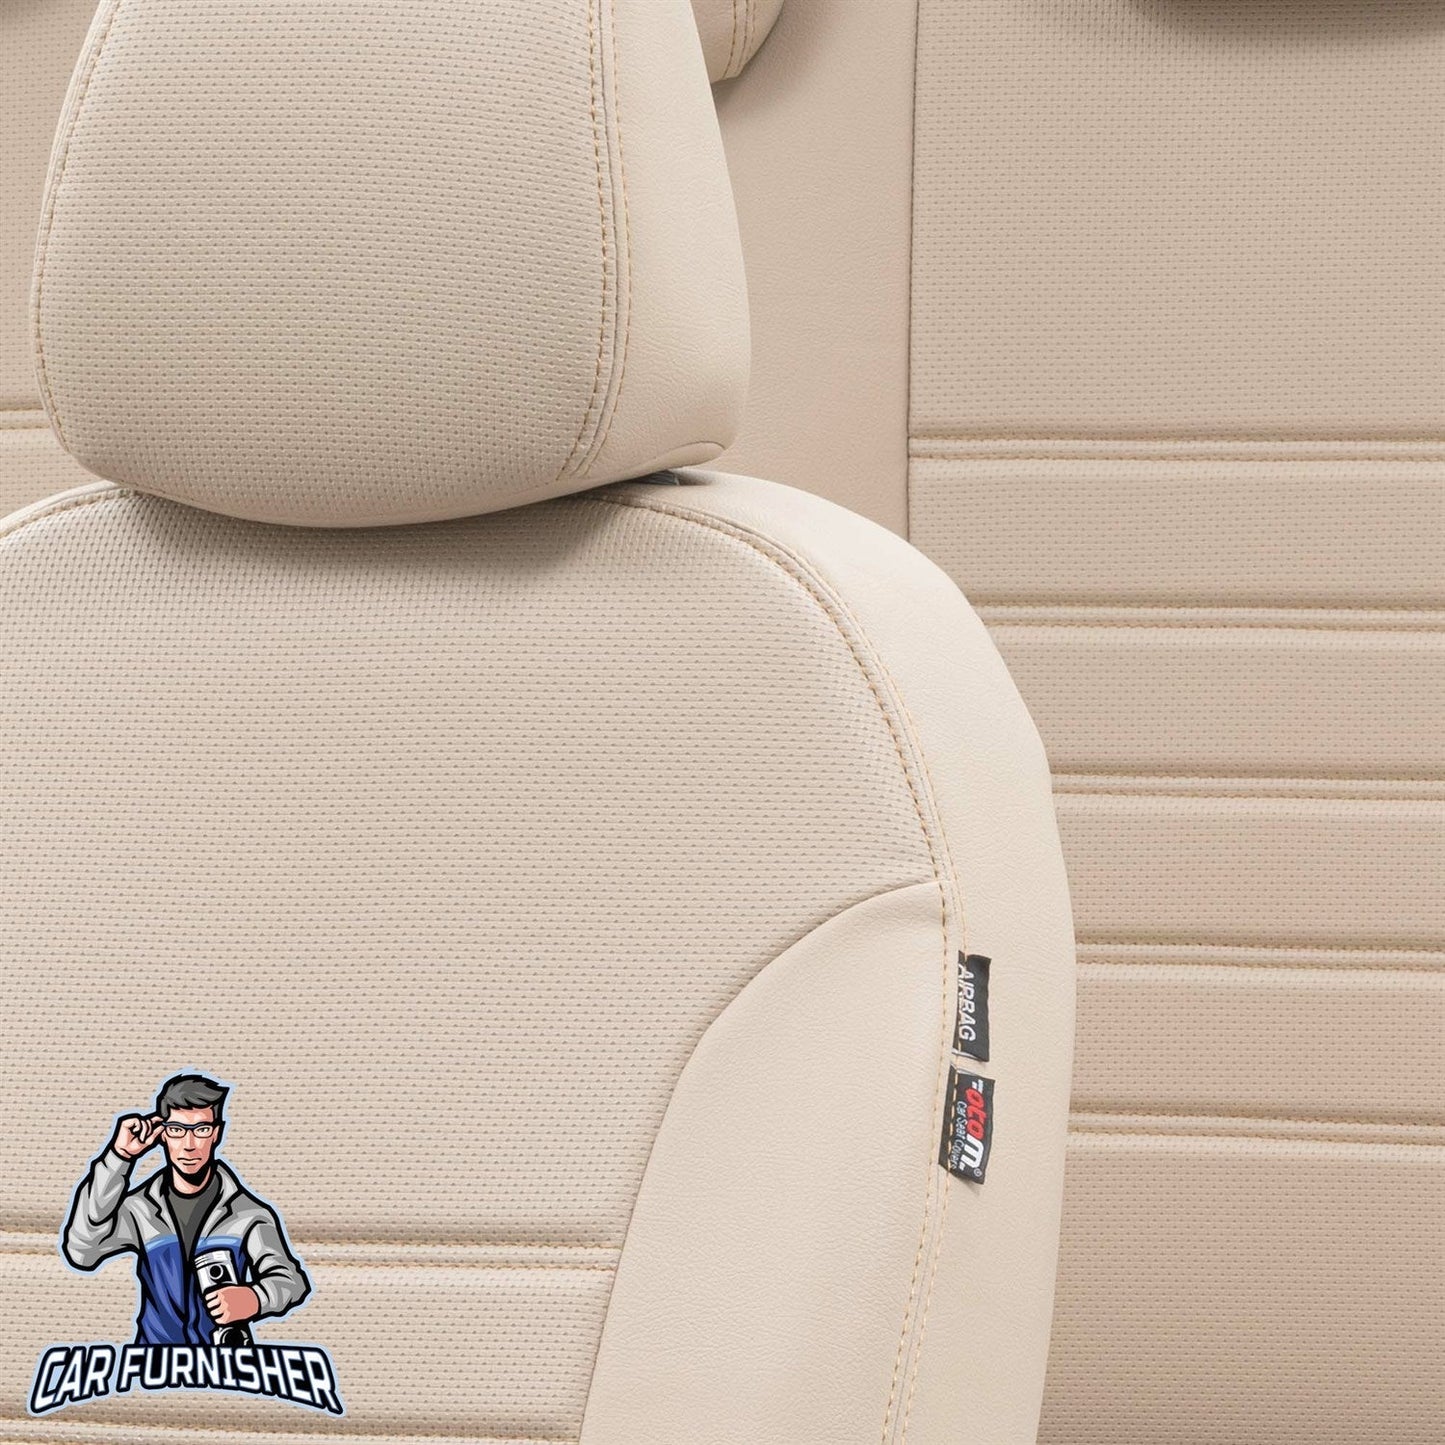 Honda Accord Seat Cover New York Leather Design Beige Leather